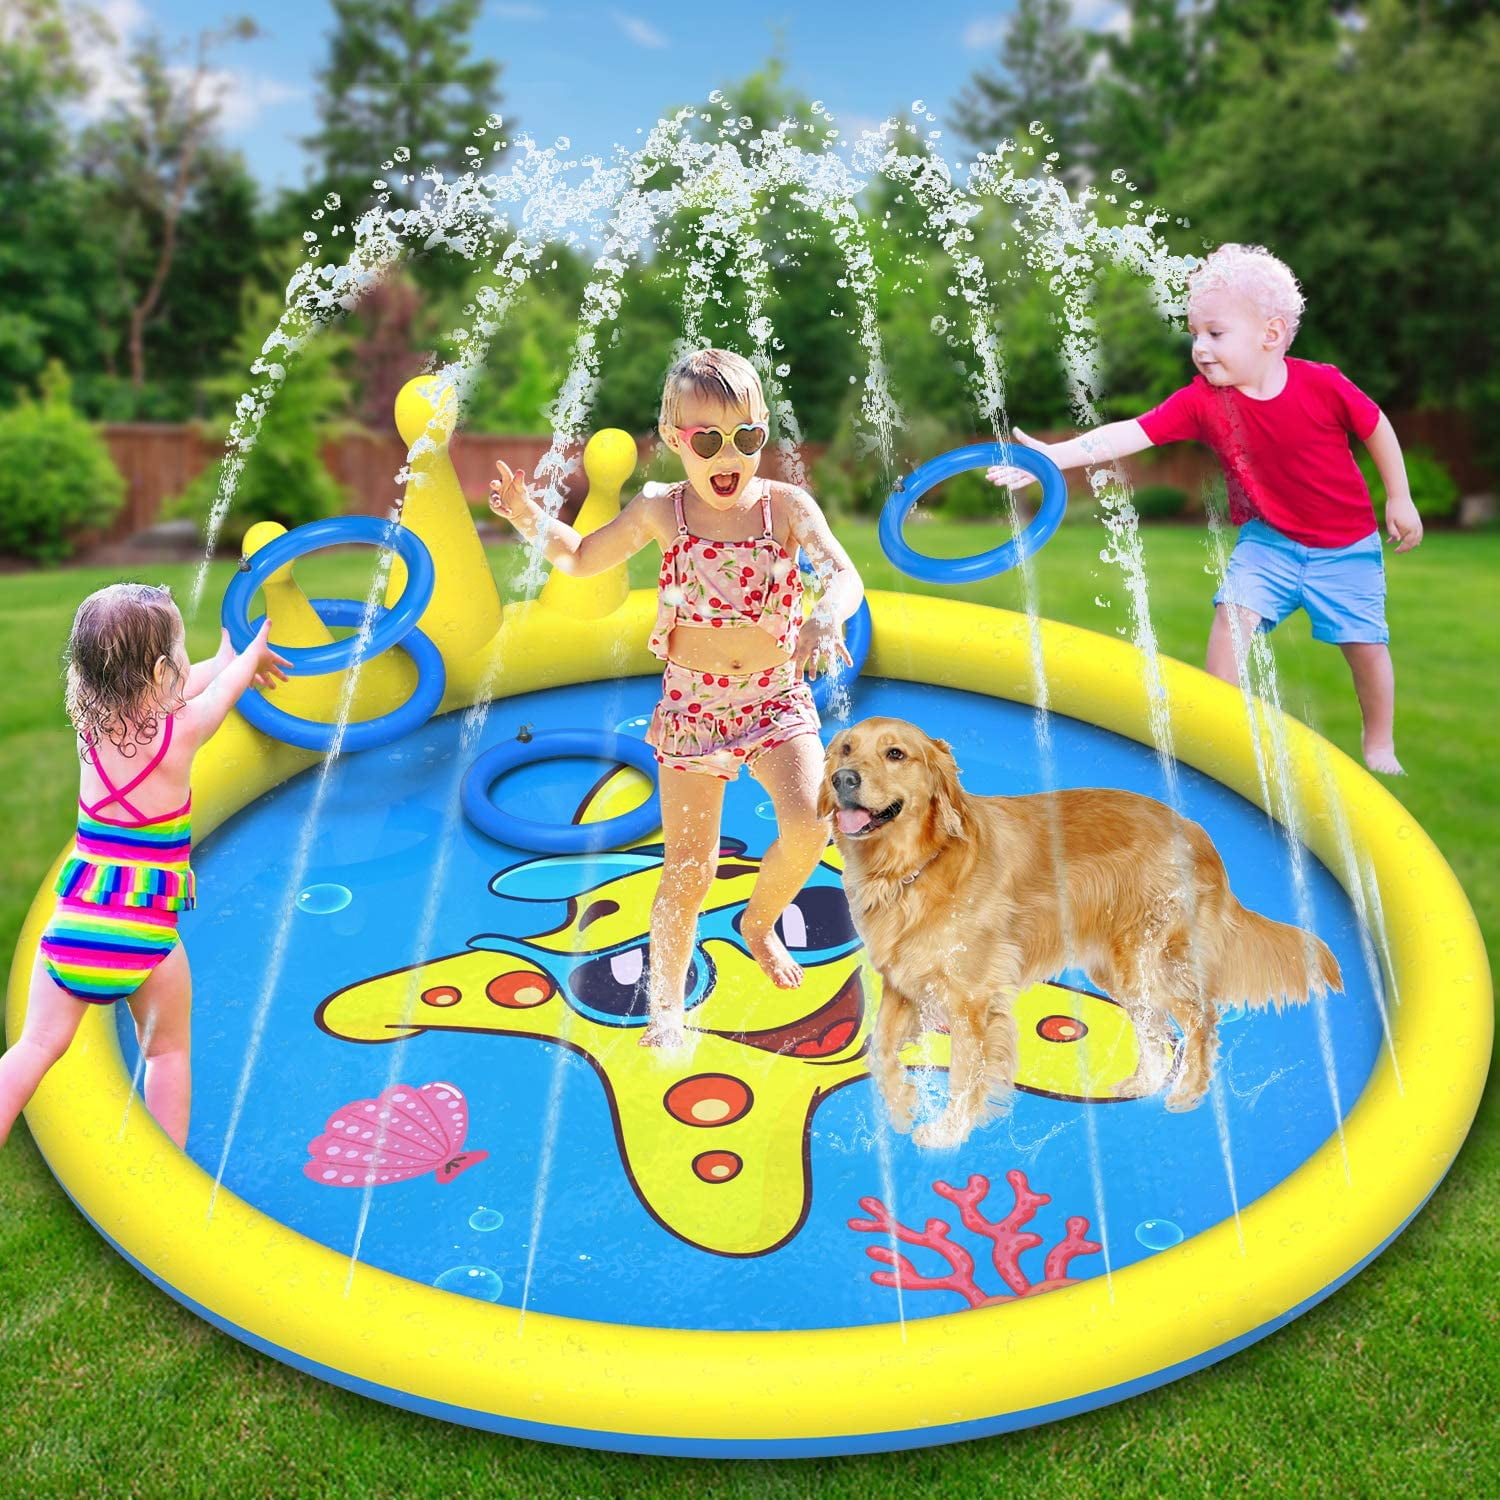 HooTown Sprinkler Splash Play Pad for Kids Dogs 68 Inflatable Outdoor Toys Splash Mat for Kids Wading and Learning Fun Water Game Toys Shallow Pool from A to Z for Infant Boys & Girls